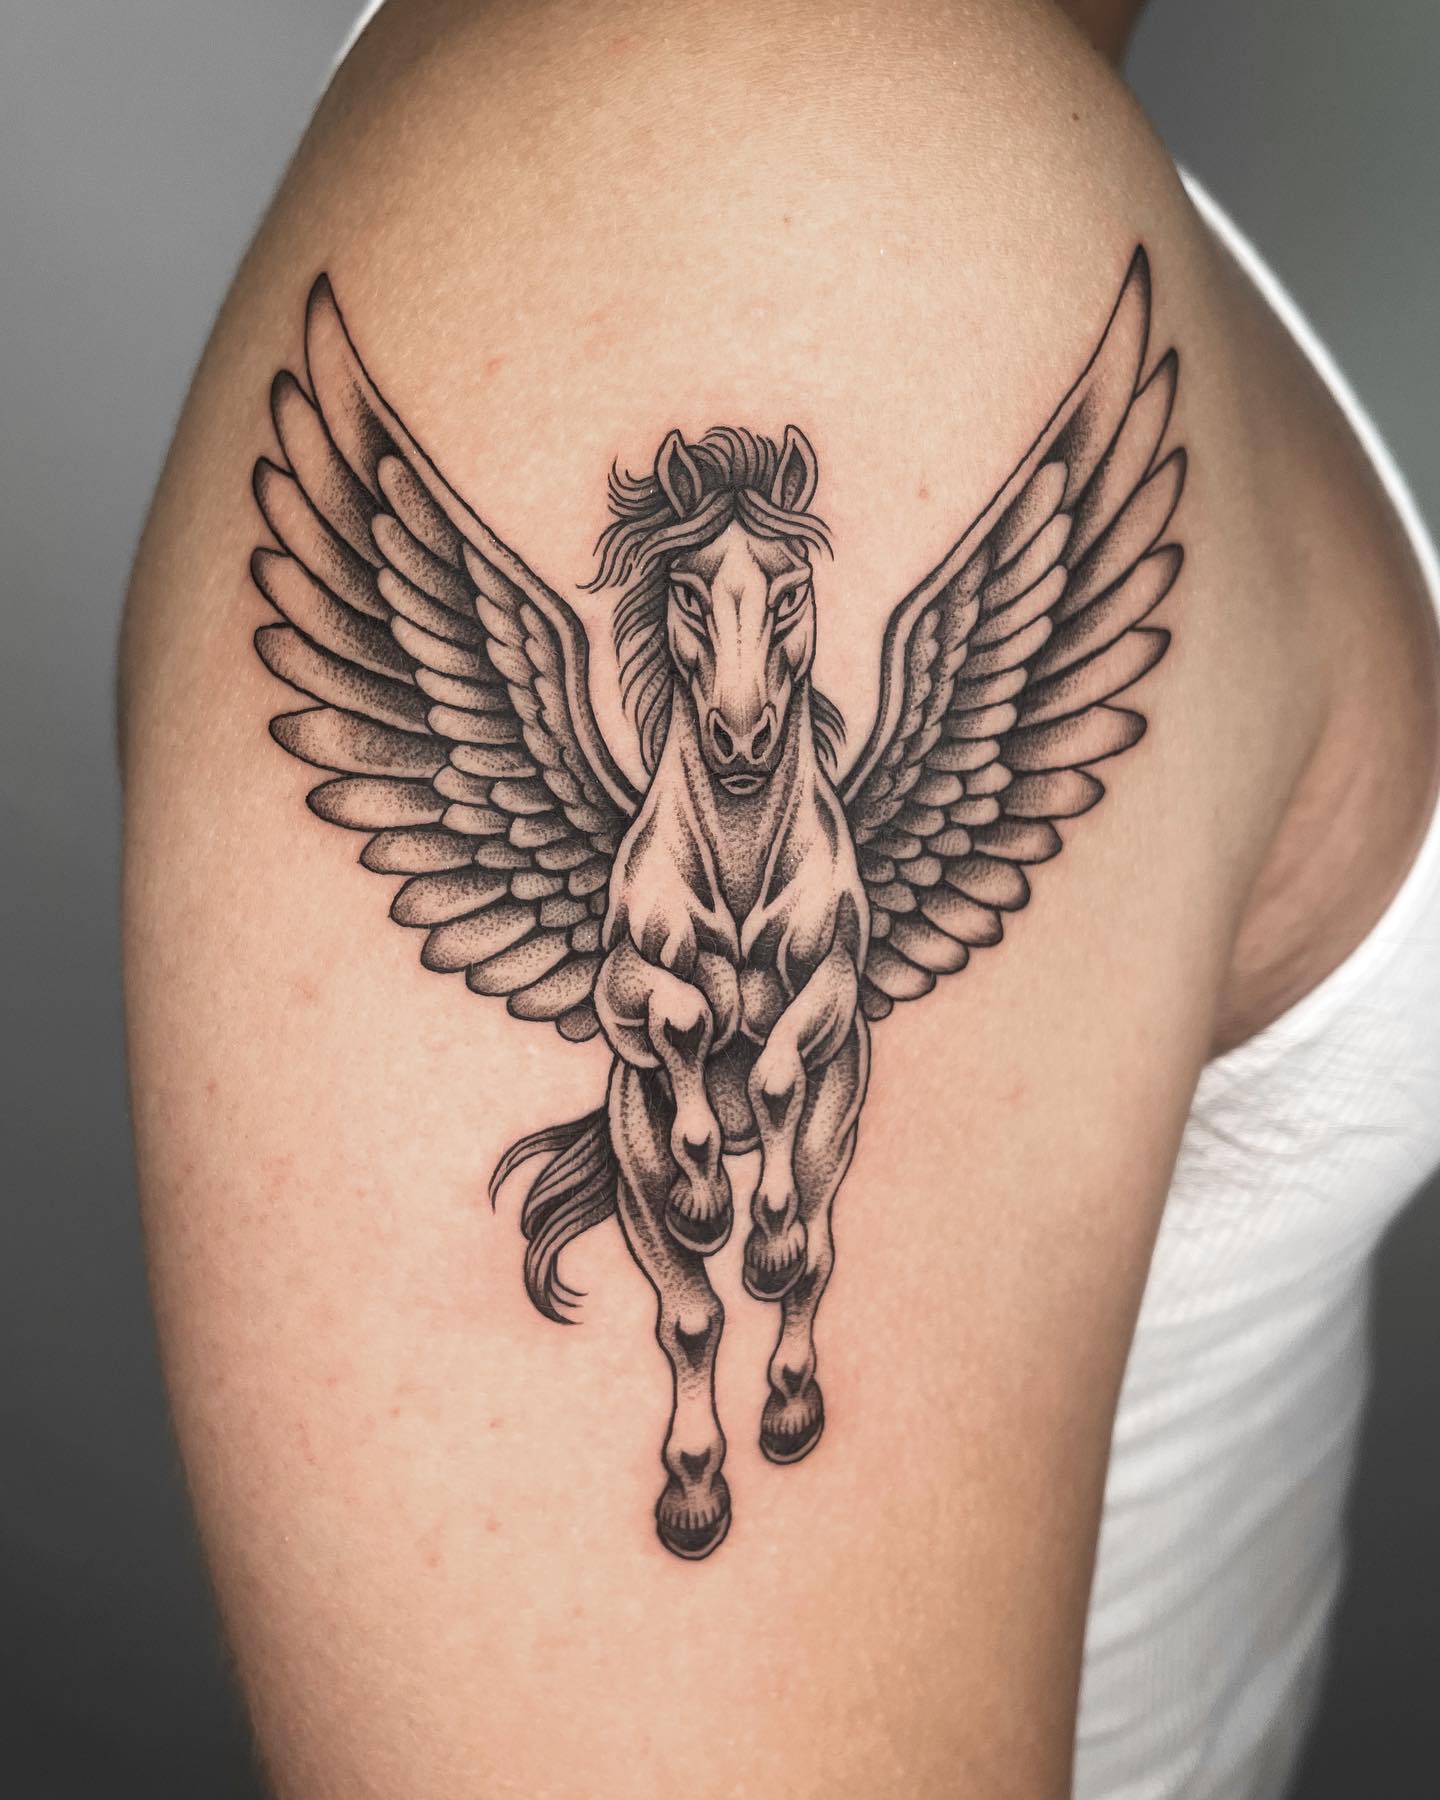 A Giant Pegasus tattoo such as this one will show that you’re not afraid of anything and that you’re your own master and destiny creator.